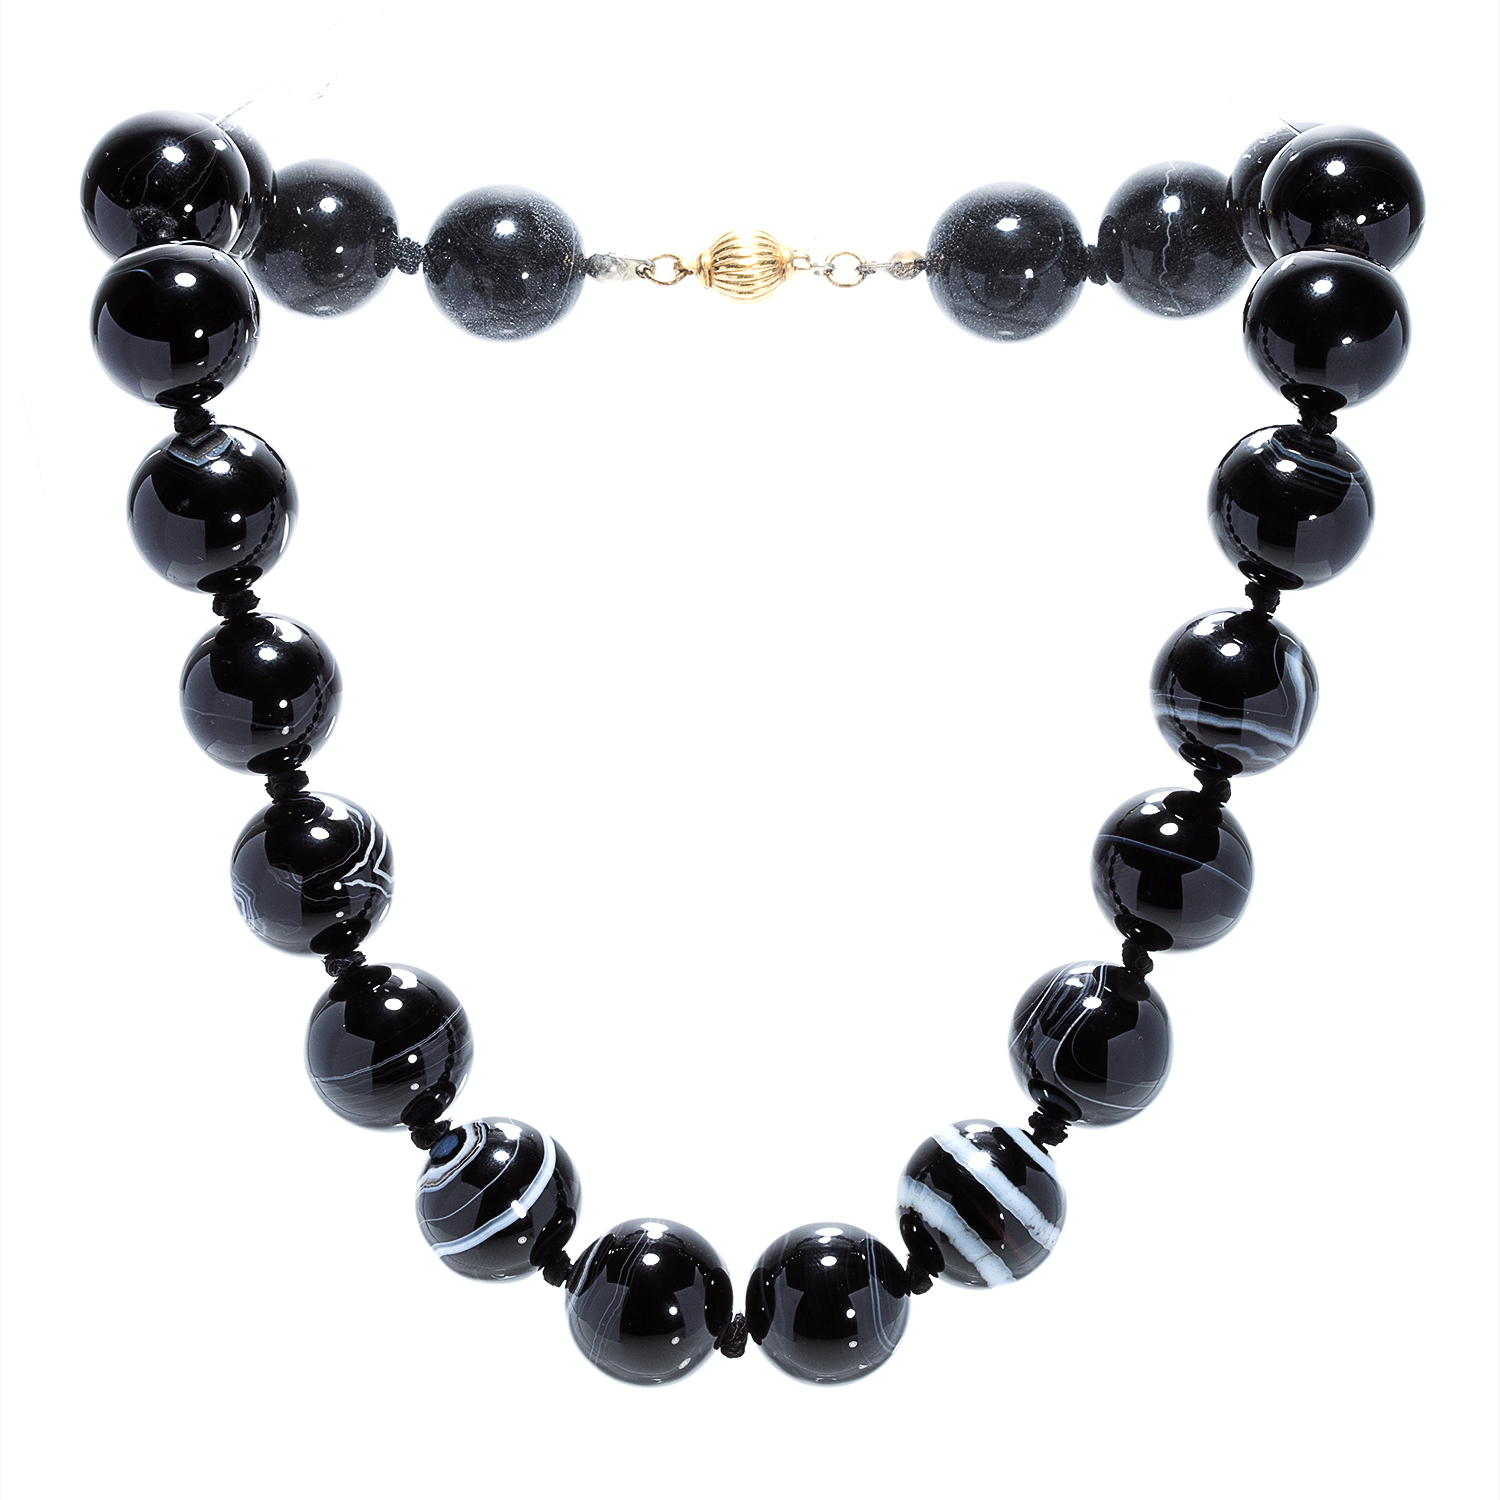 A BANDED AGATE BEAD NECKLACE comprising a single row of twenty two banded agate beads of 18-19mm